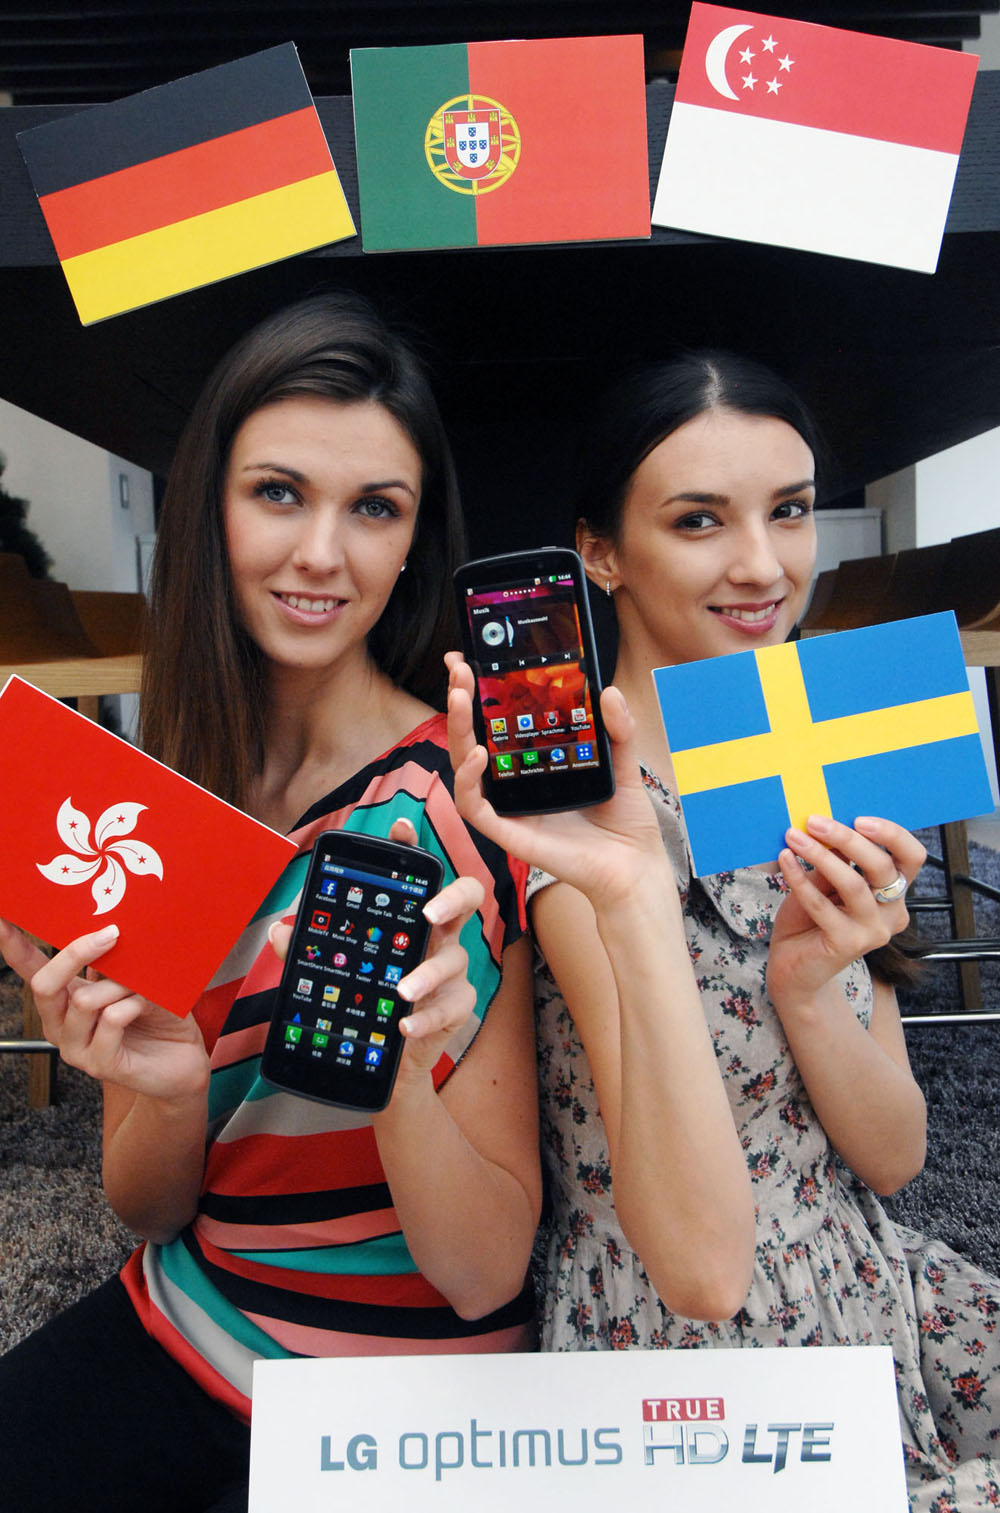 Another view of two models holding an LG Optimus True HD LTE phone and a panel engraved with the brand name LG Optimus True HD LTE